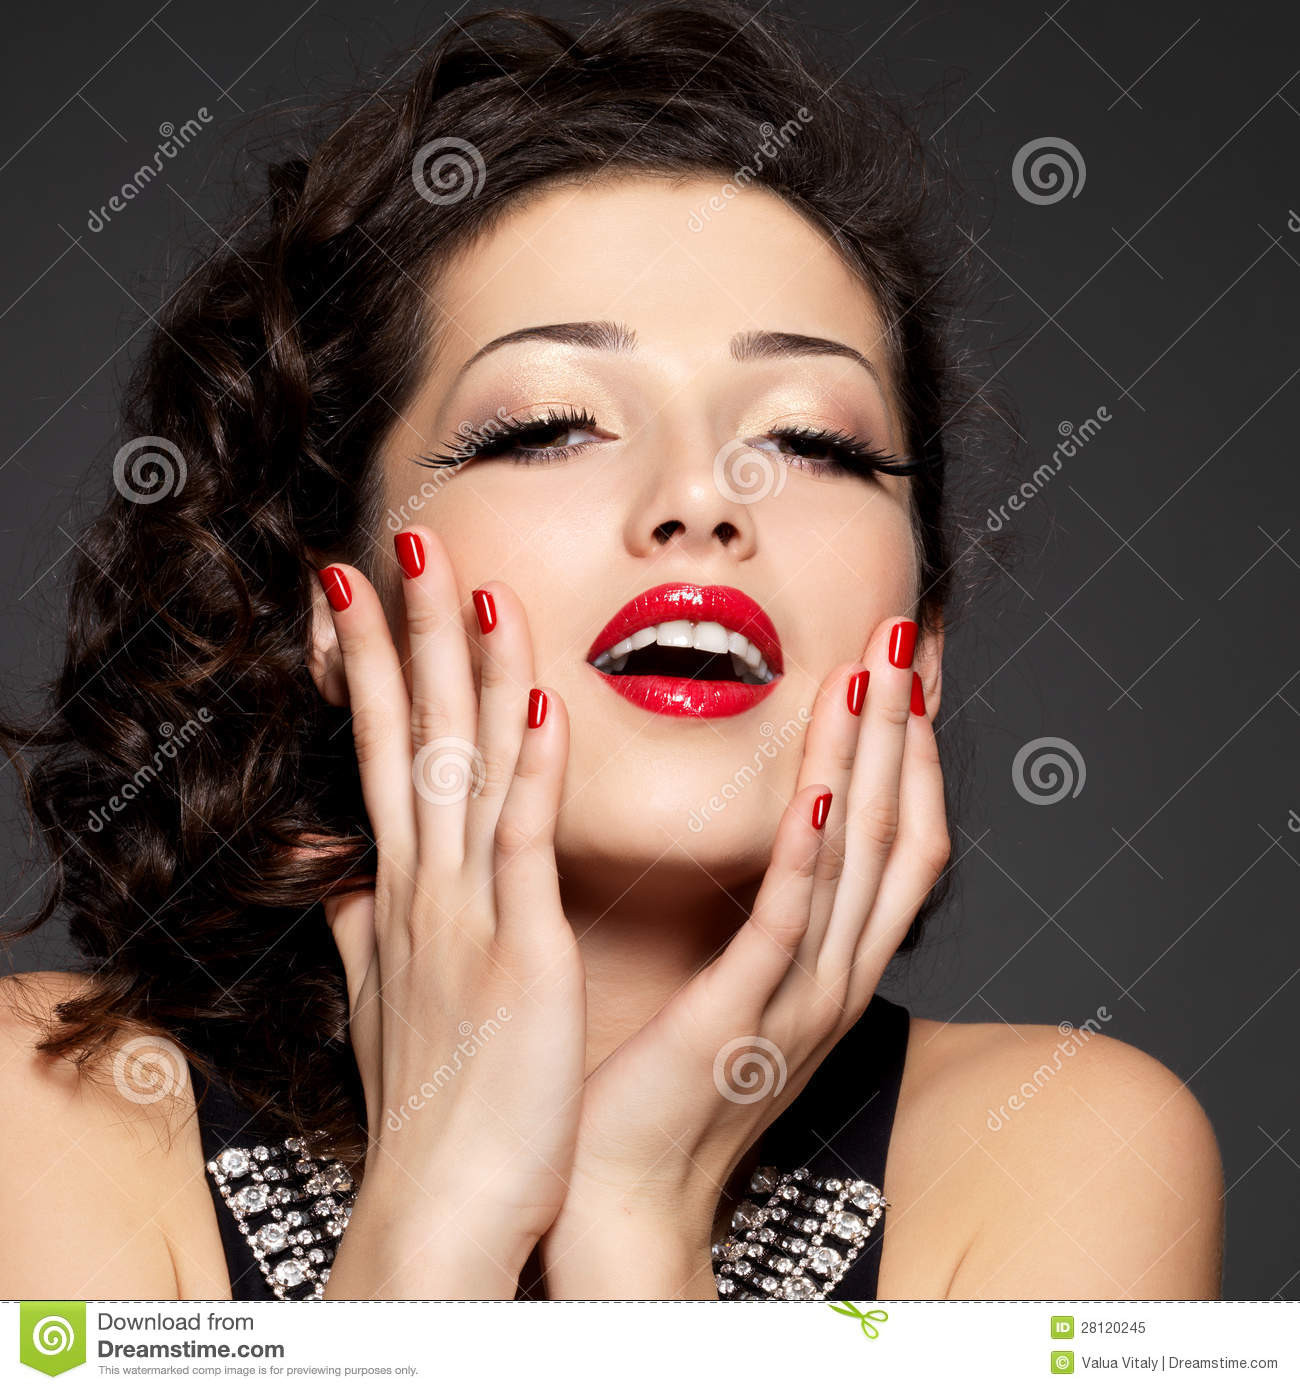 Pretty Woman Nails
 Young Pretty Woman With Red Nails And Lips Stock Image